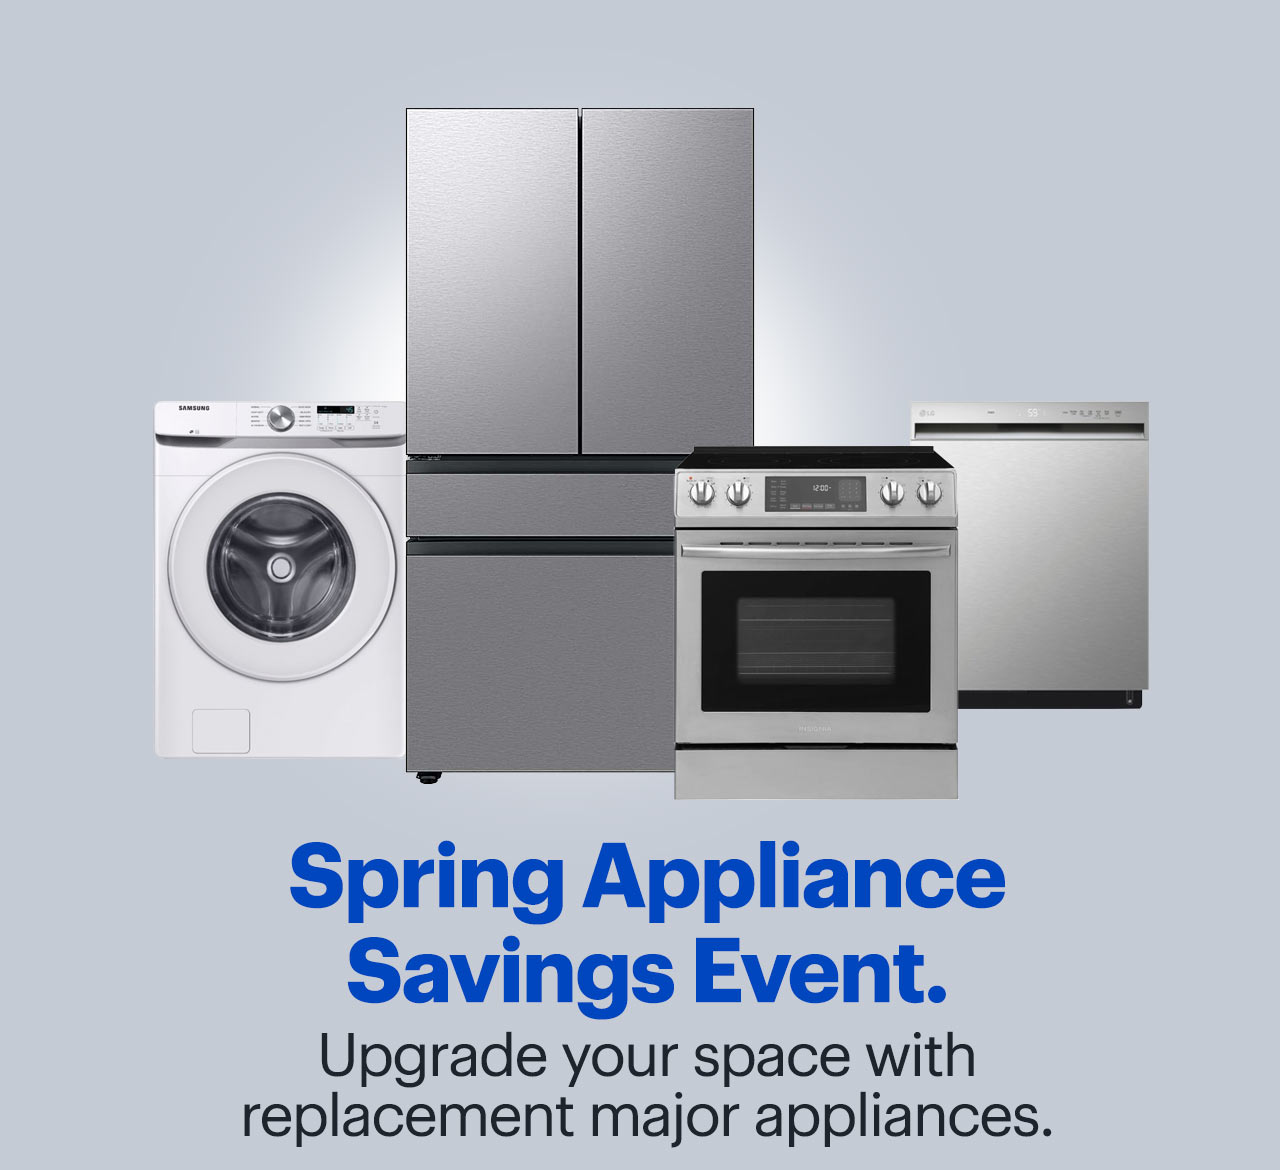 Spring Appliance Savings Event. Upgrade your space with replacement major appliances.